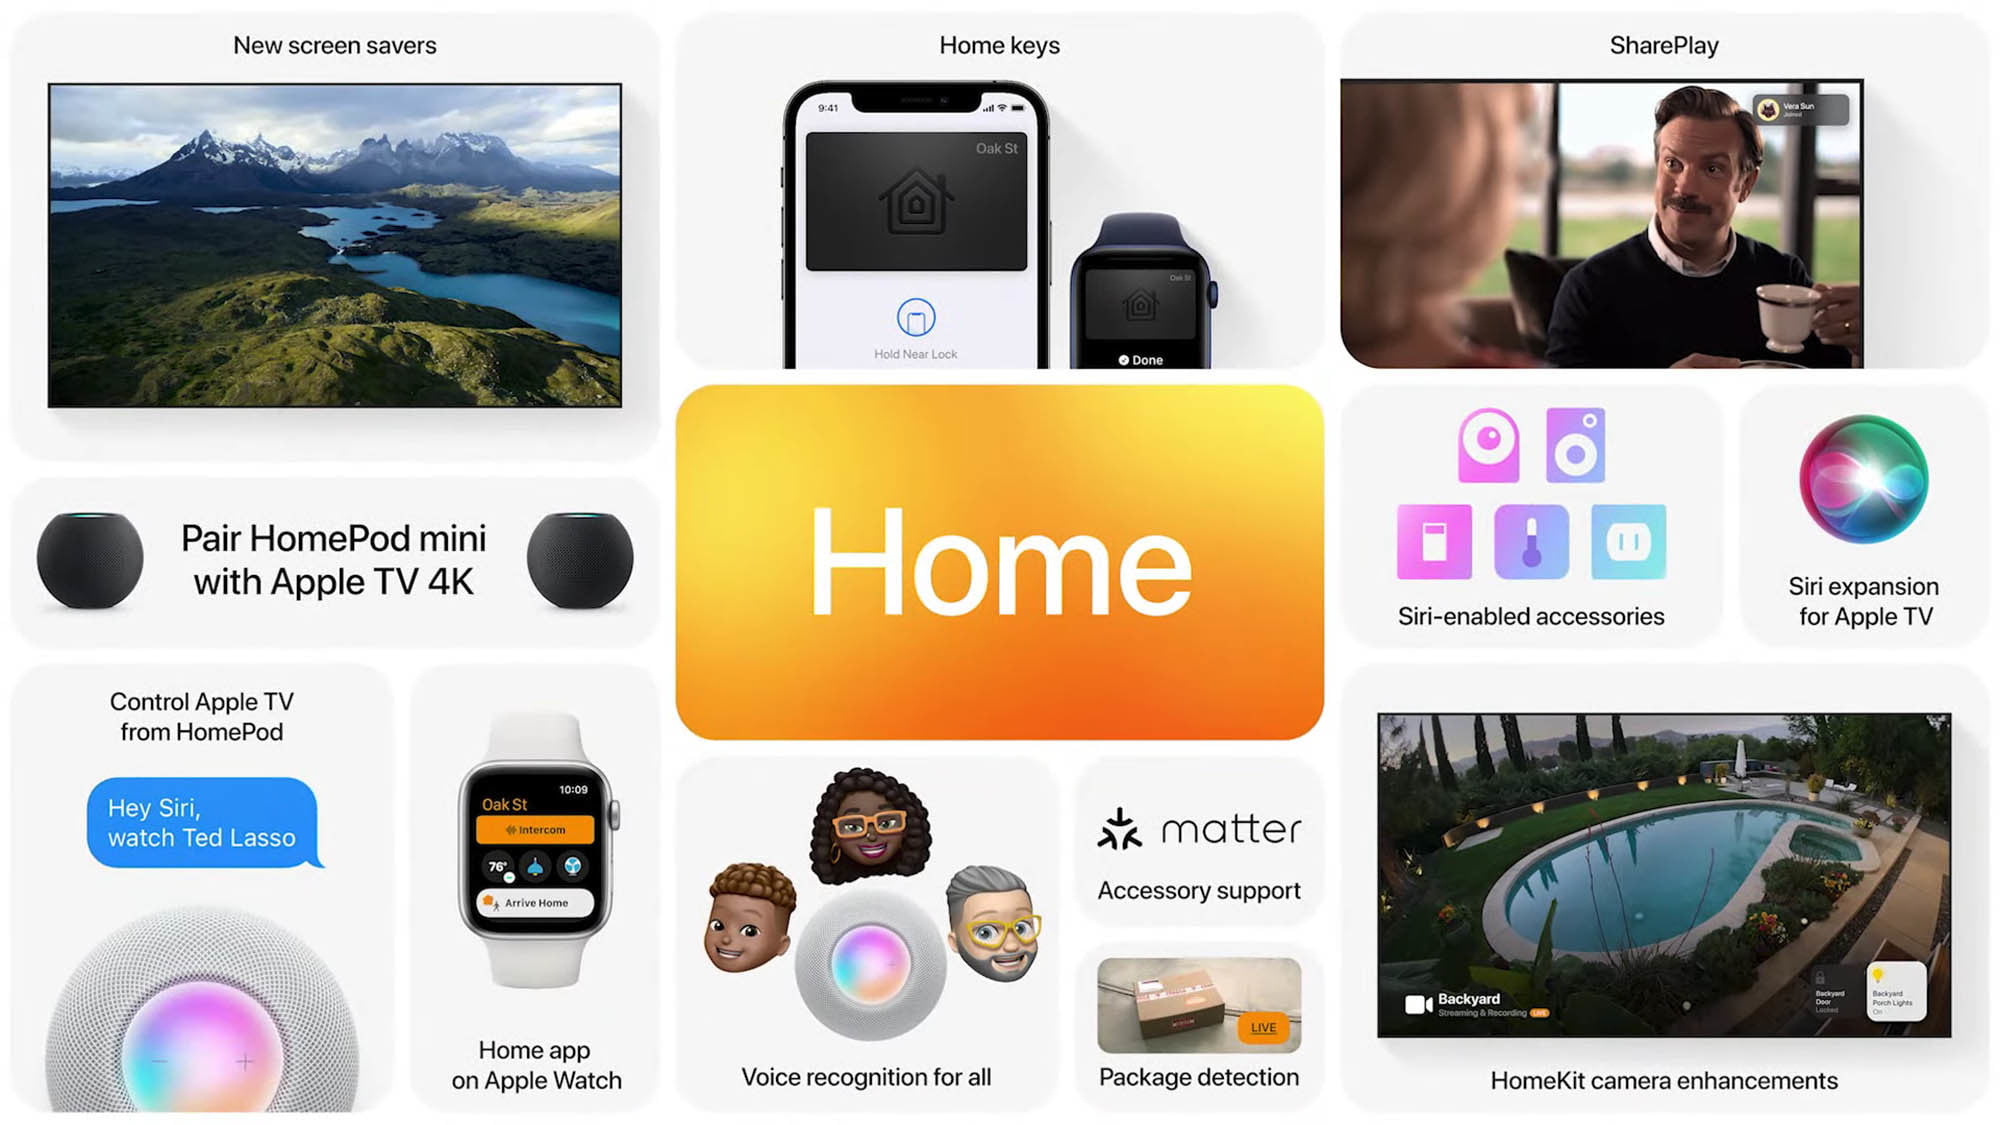 apple-home-overview-copy-2000x1125-1